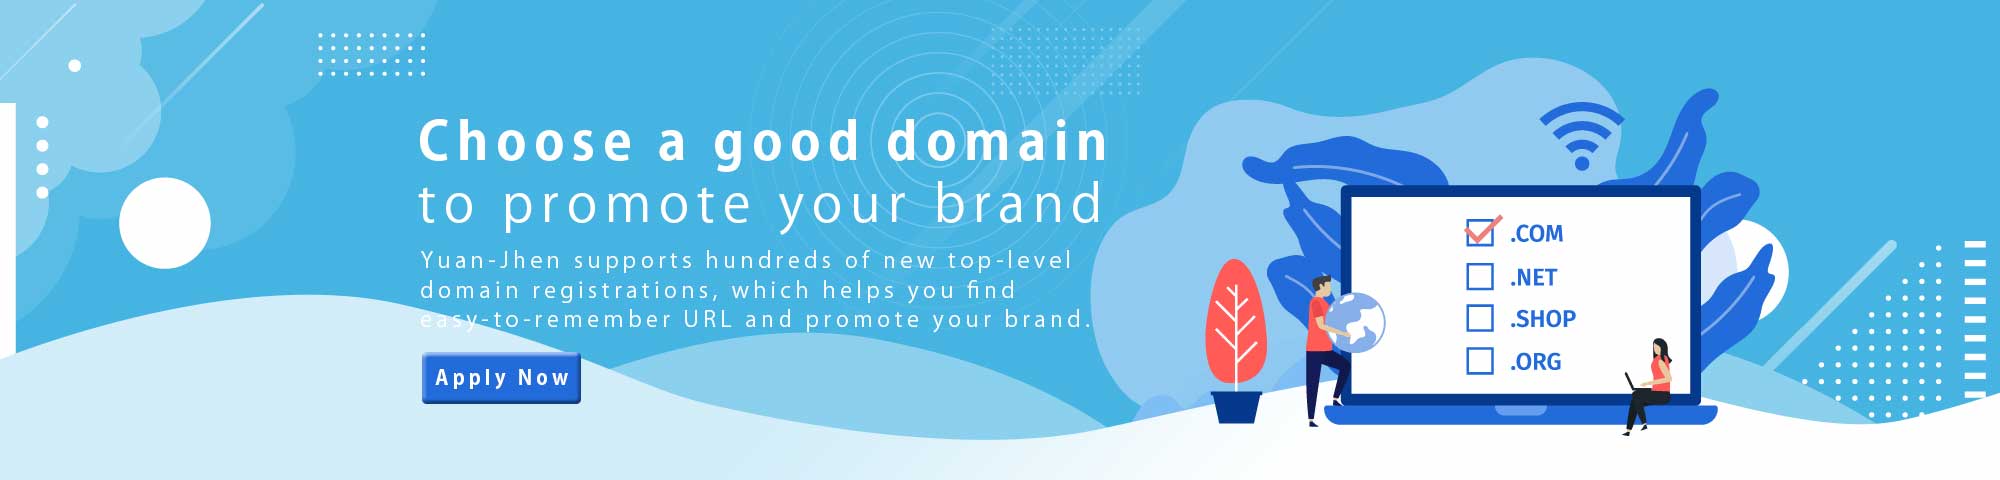 Choose a good domain to promote your brand